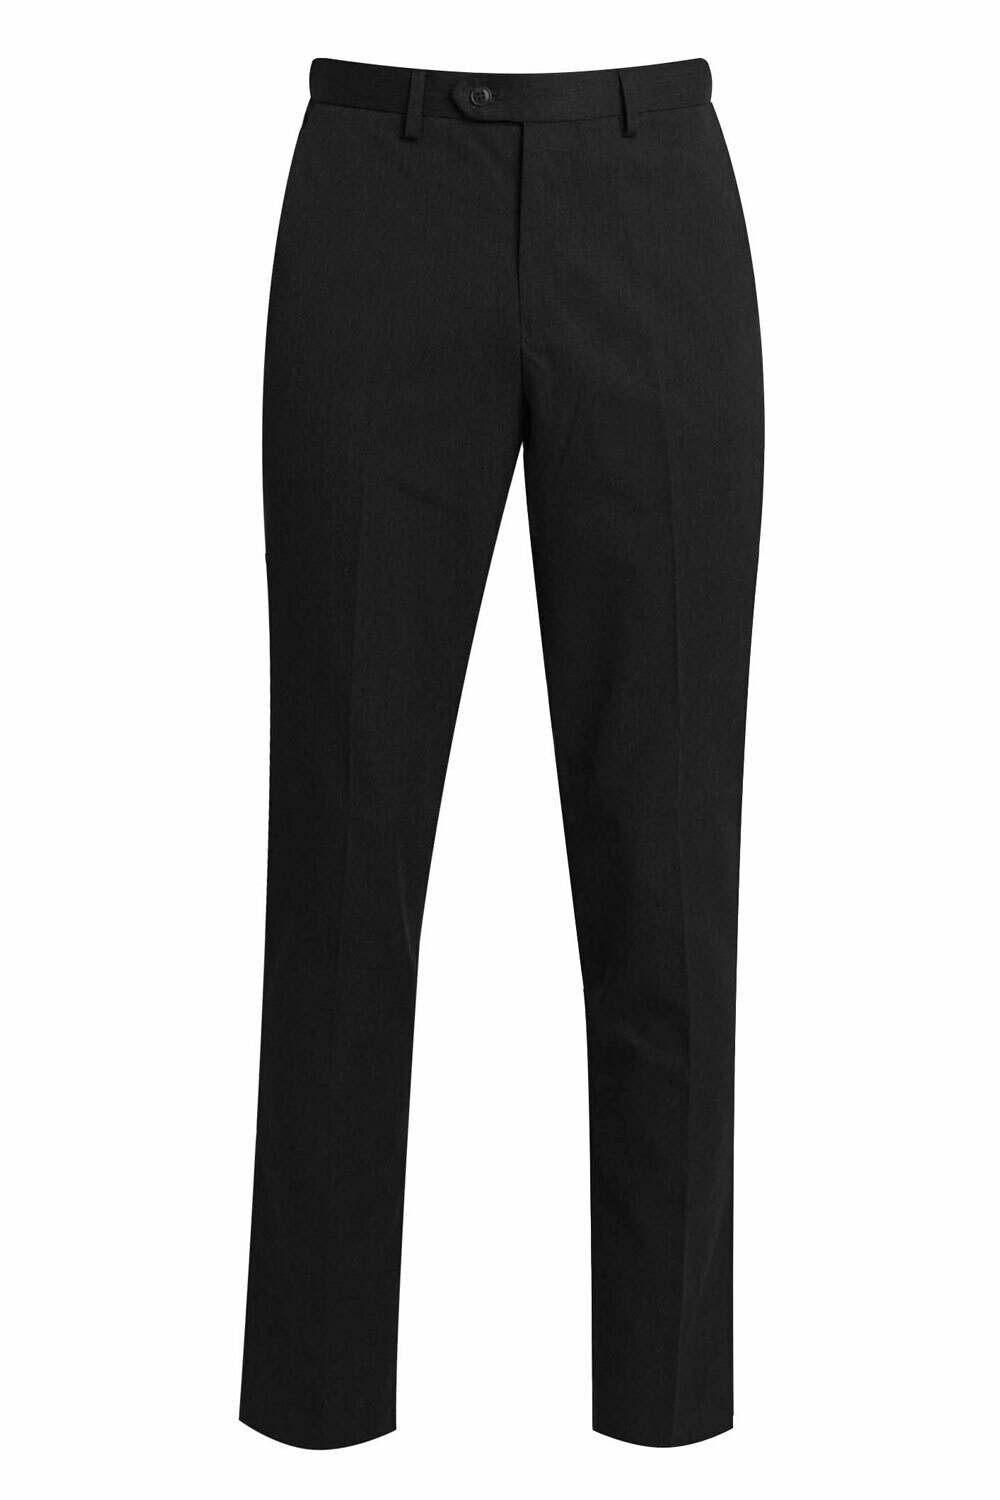 Senior School Ultra Slim Fit Boys Trouser (Black only from Age 8-9)